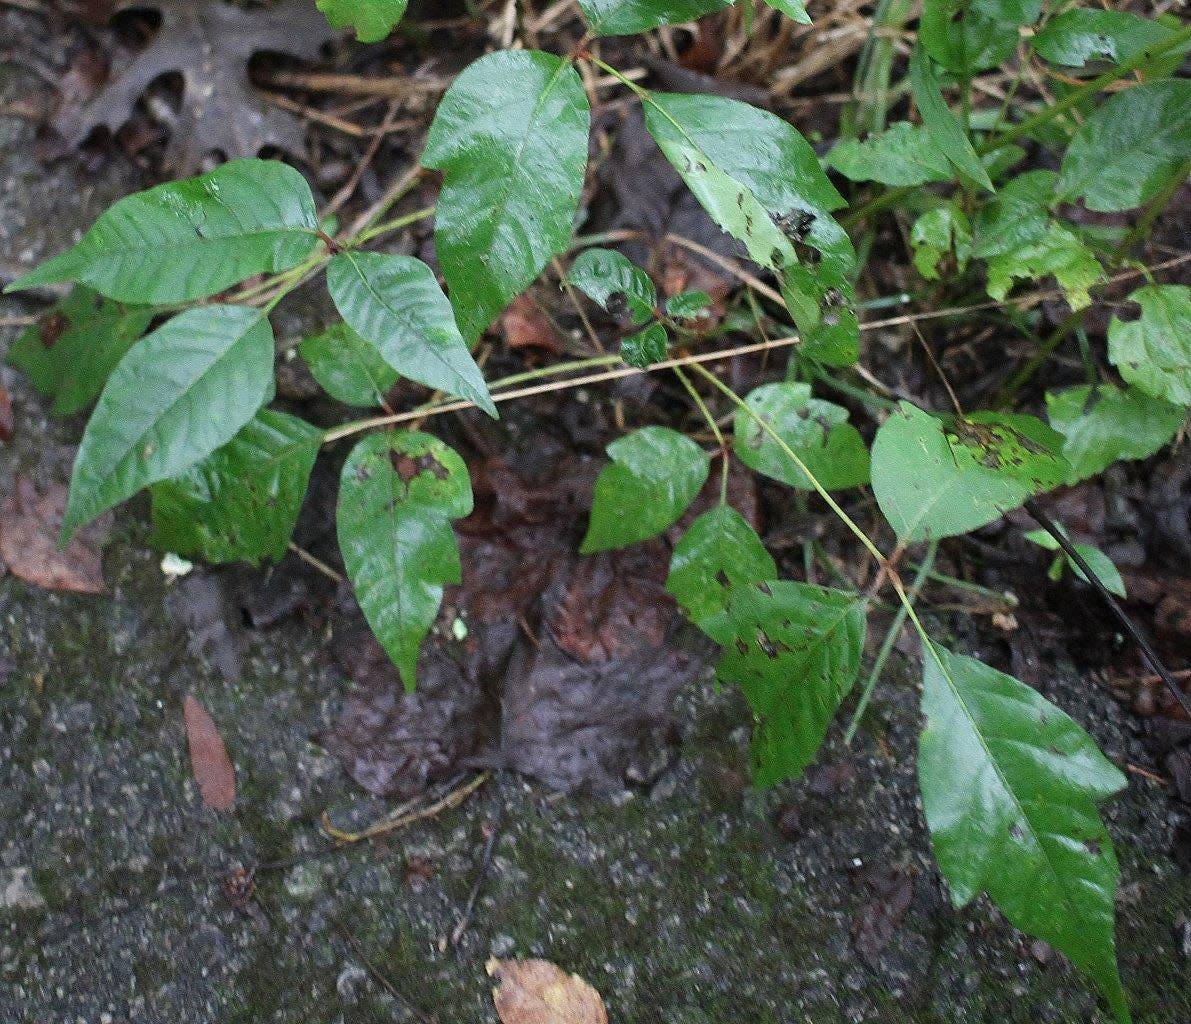 Poison Ivy is found and identified along a Scavenger Hunt at Bledsoe Creek State Park on Saturday, /August 21, 2021.